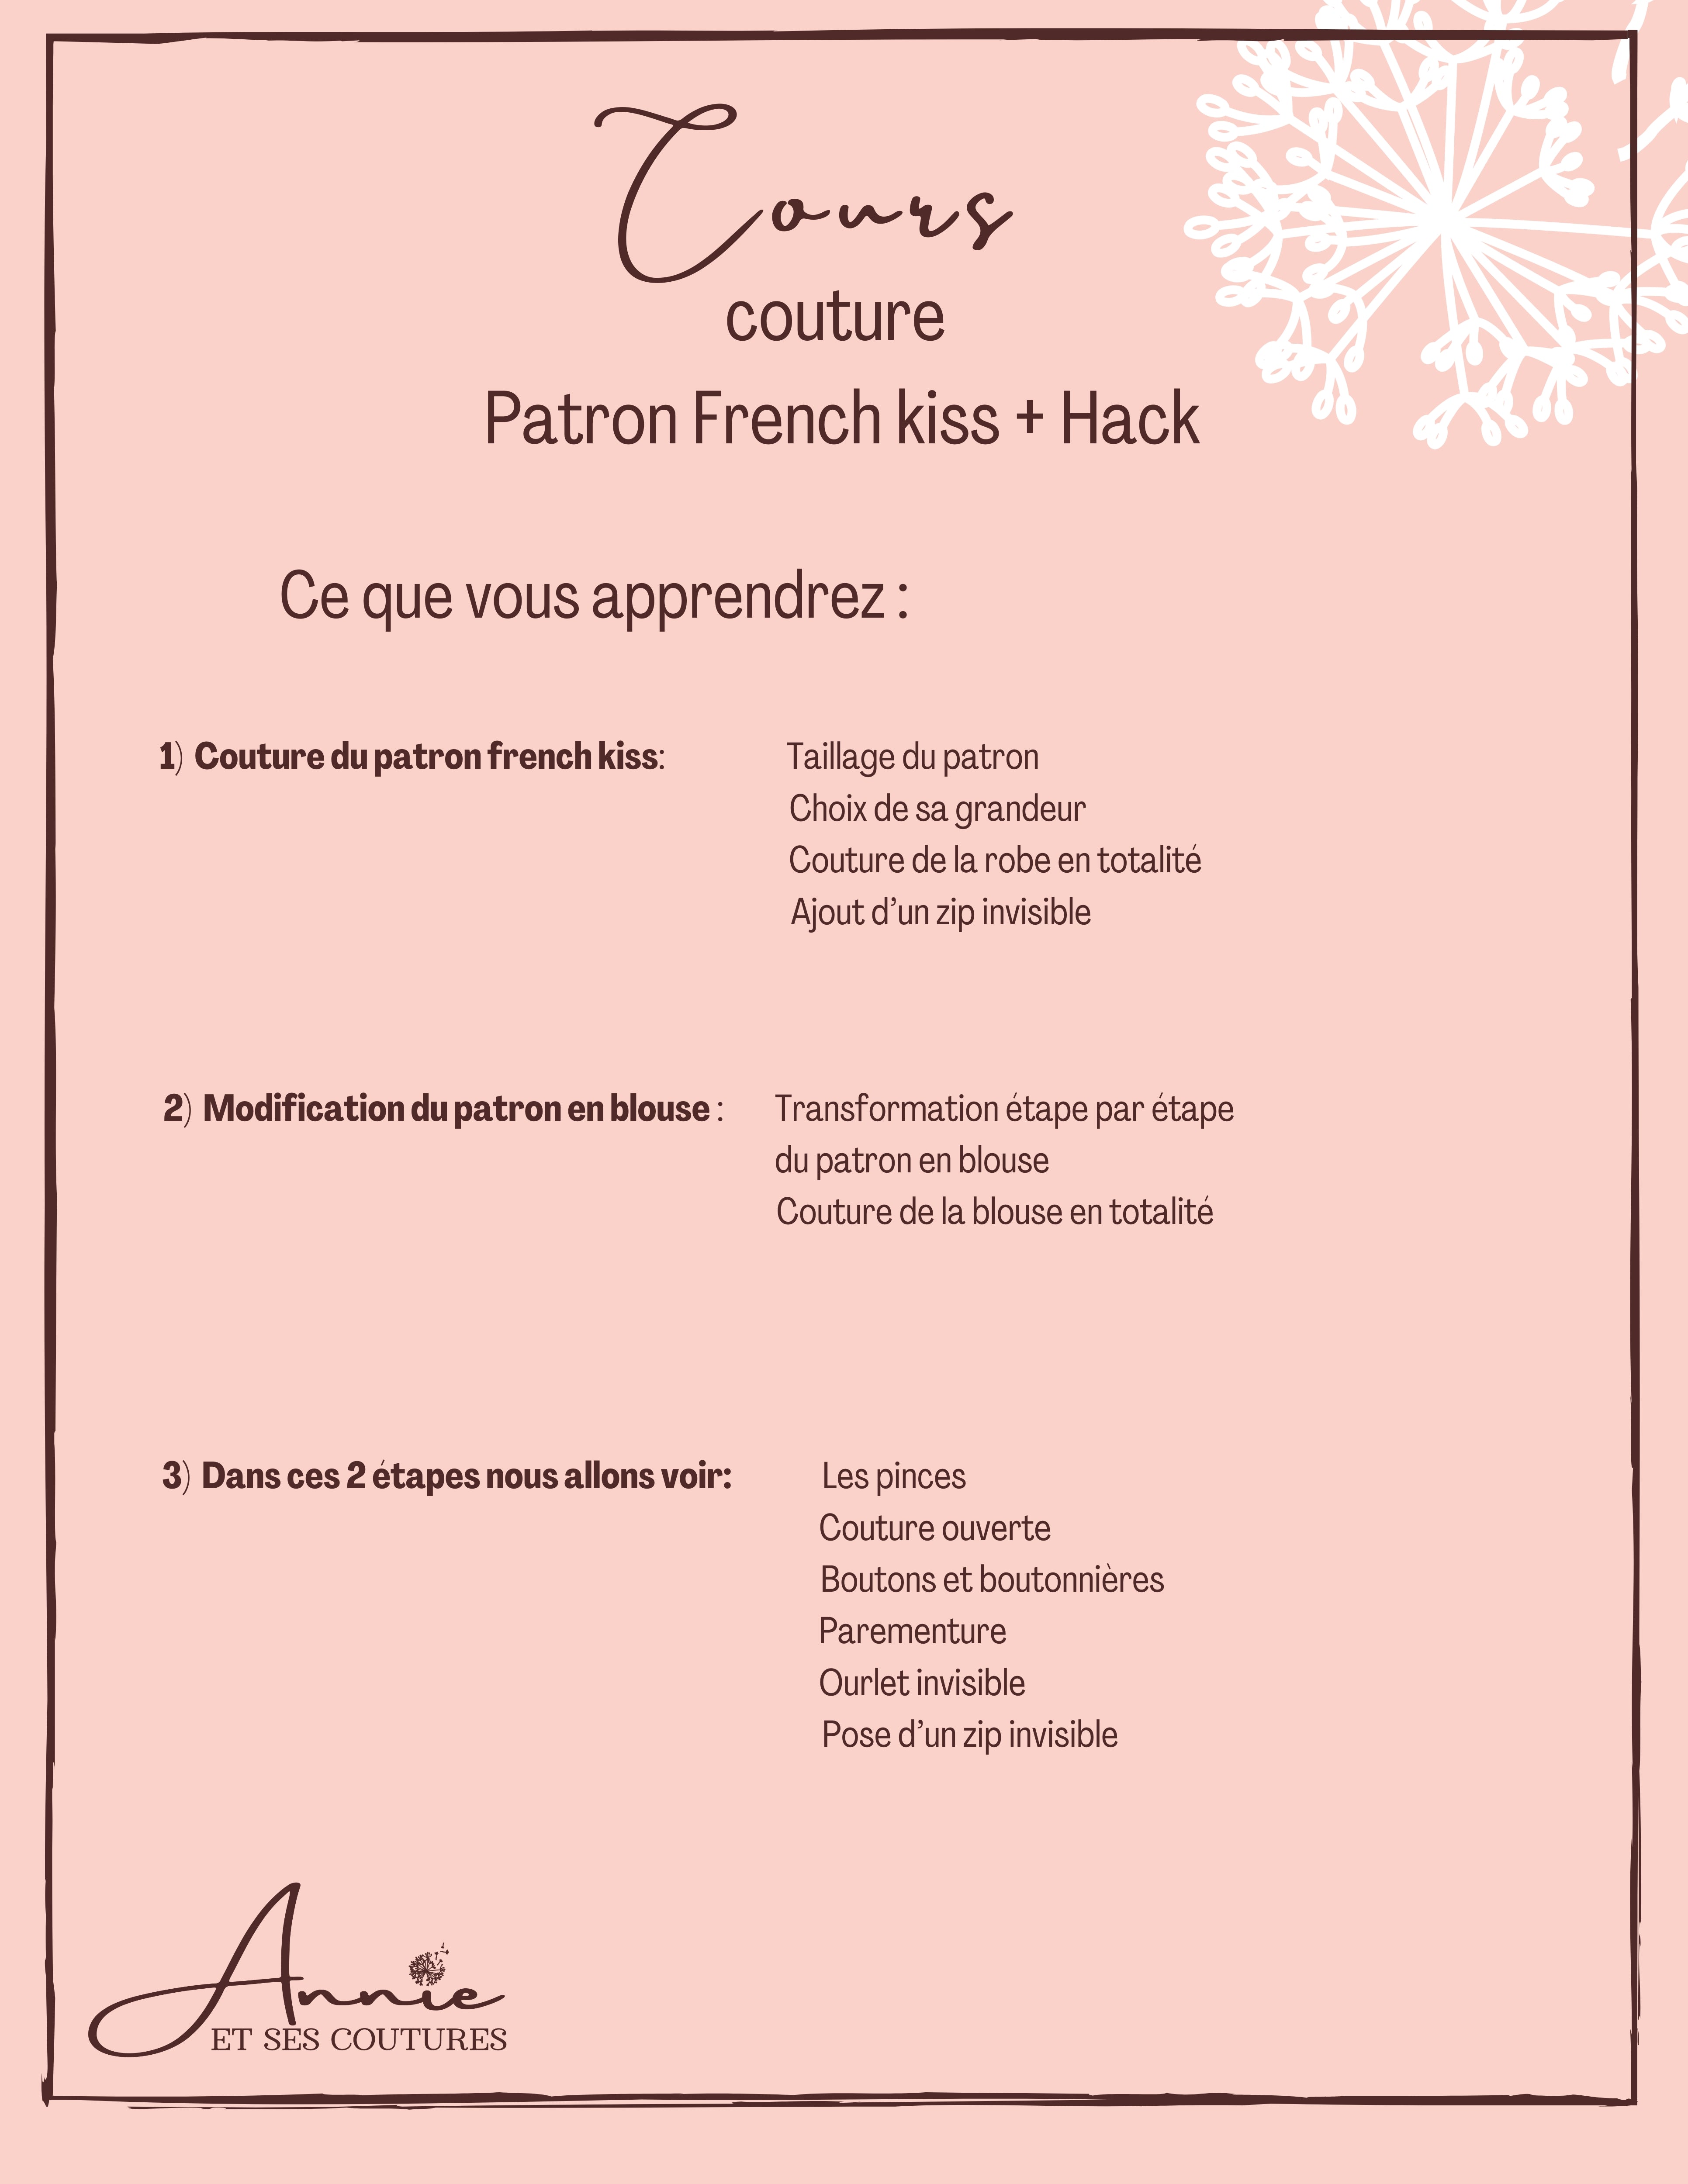 Online sewing course - French kiss pattern and hack